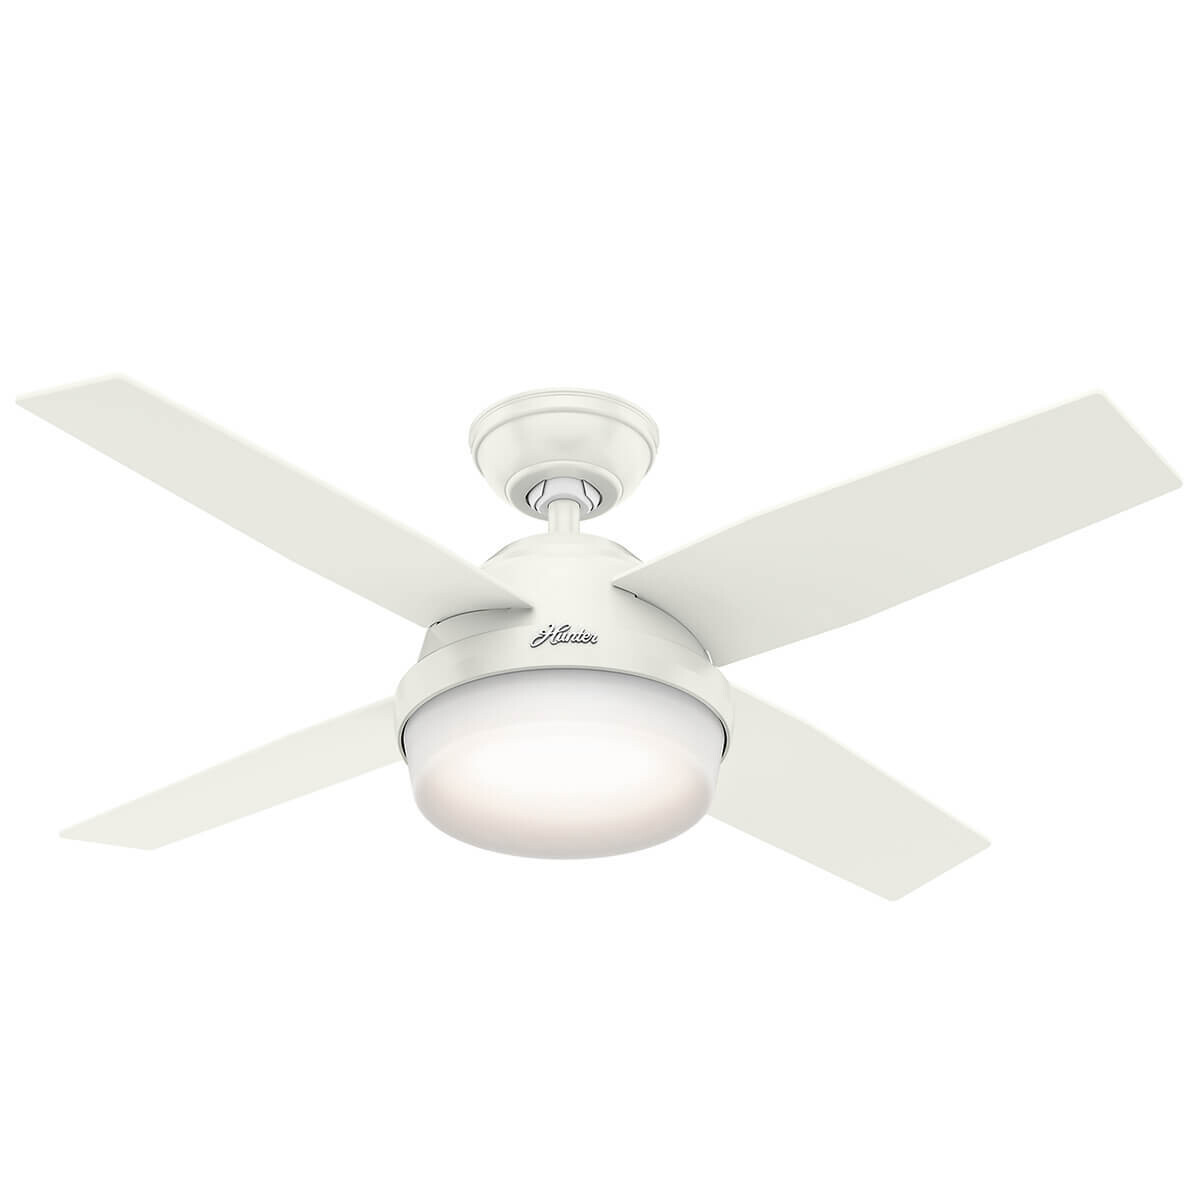 HUNTER DANTE WE ceiling fan Ø112 with Light Kit and Remote Control included